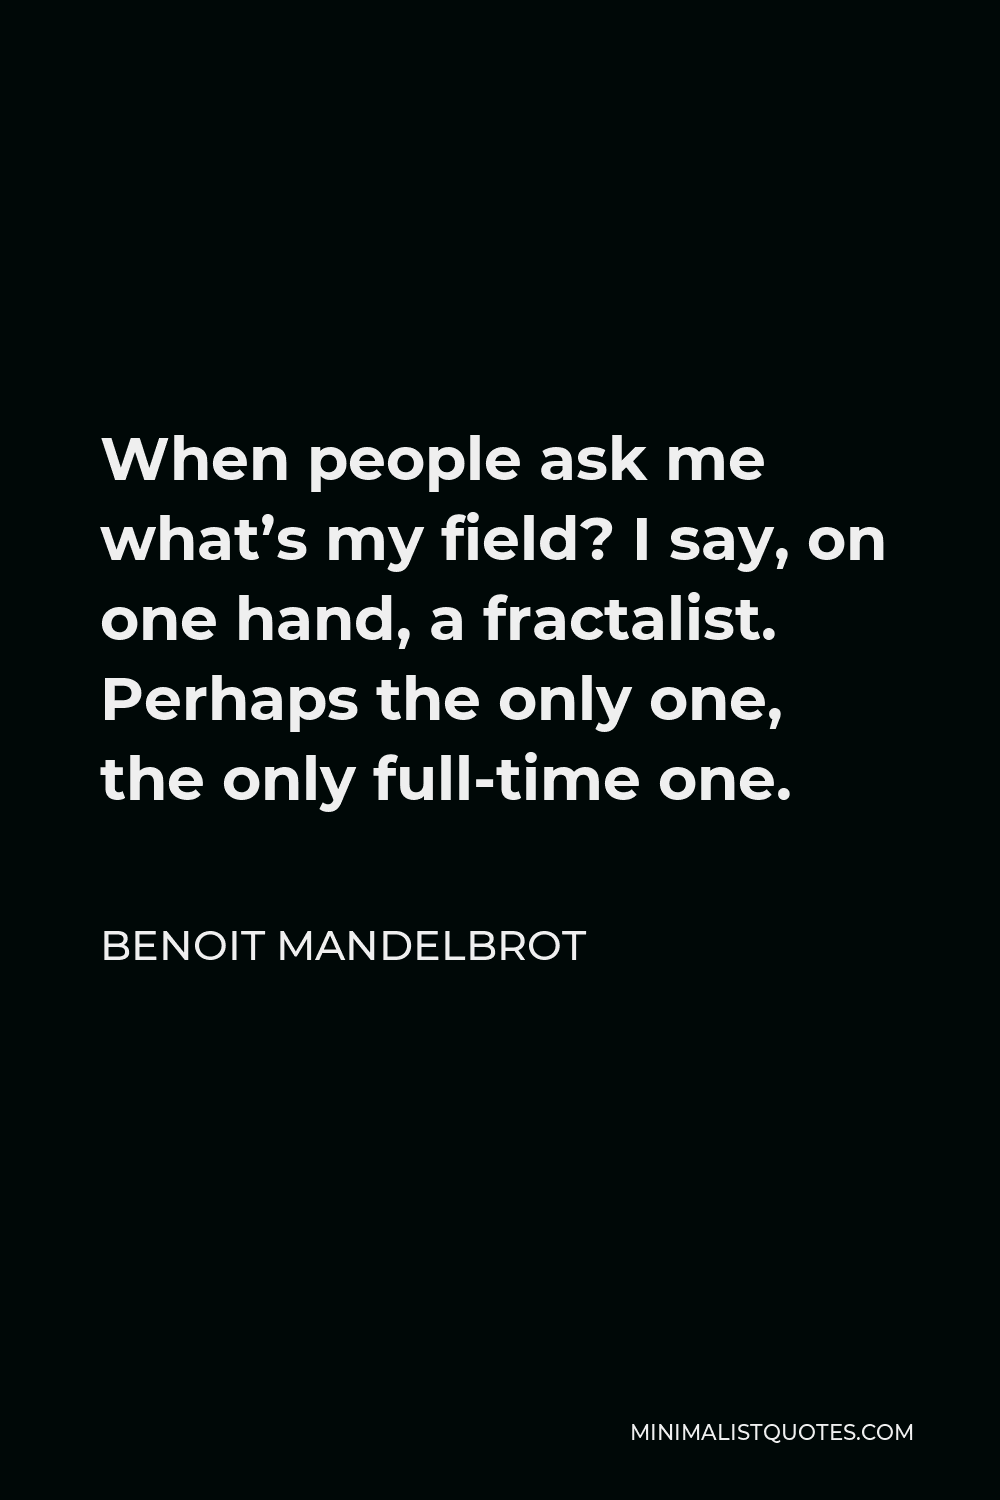 Benoit Mandelbrot Quote - When people ask me what’s my field? I say, on one hand, a fractalist. Perhaps the only one, the only full-time one.